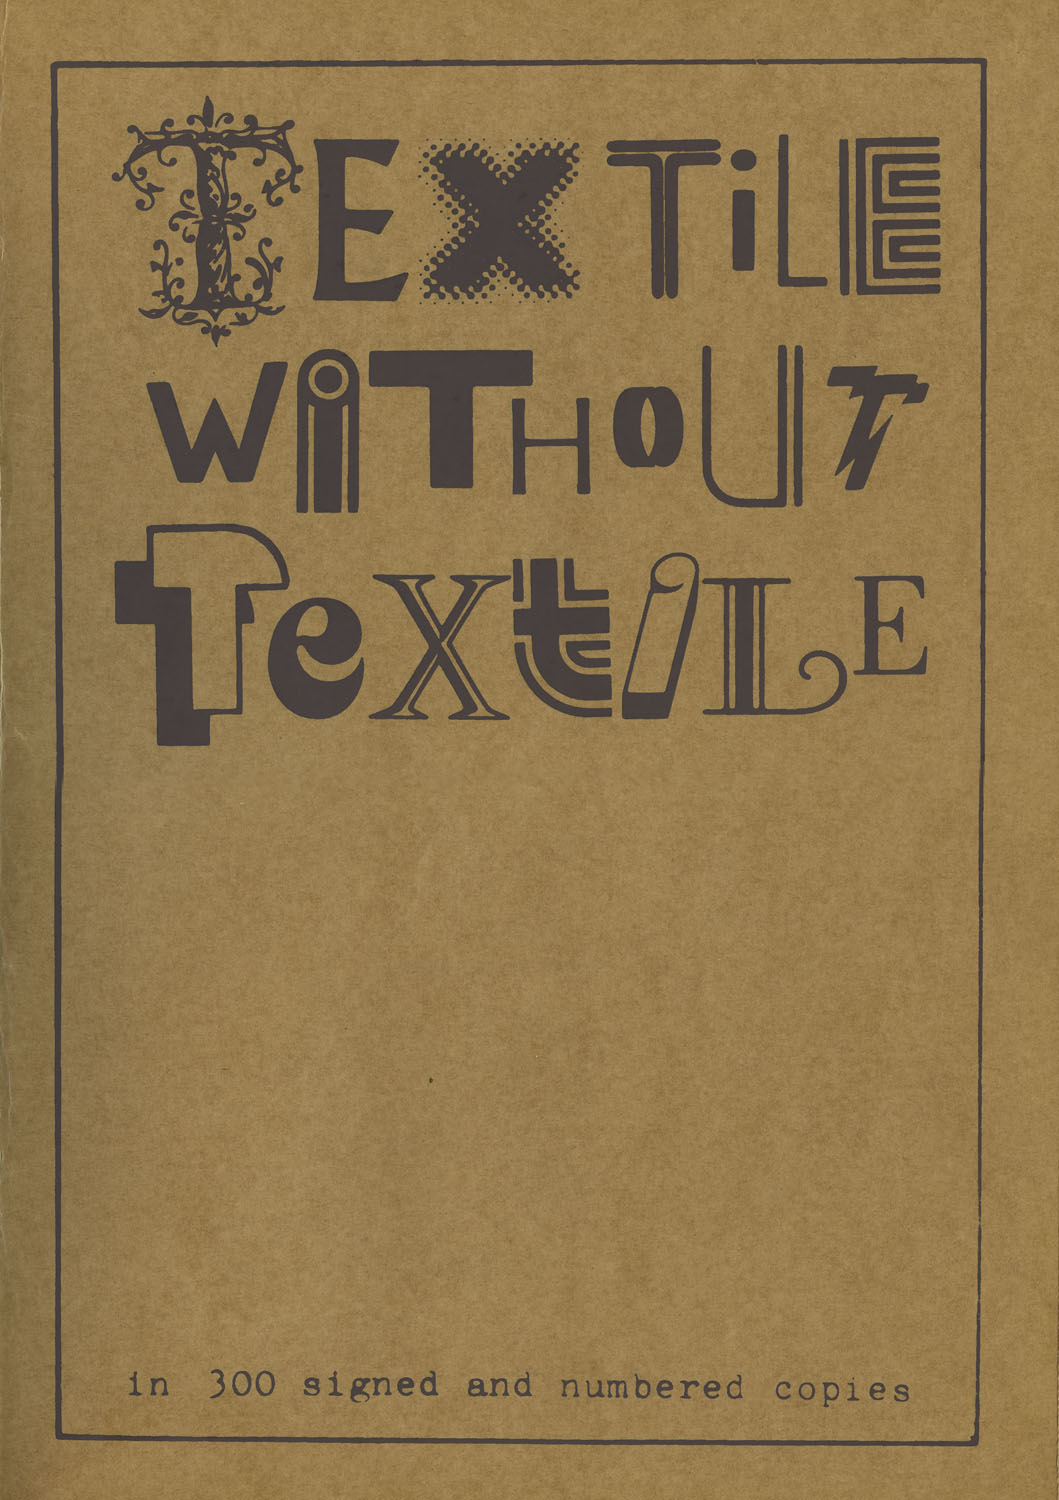 Silk screened cover of the assembling TEXTILE WITHOUT TEXTILE